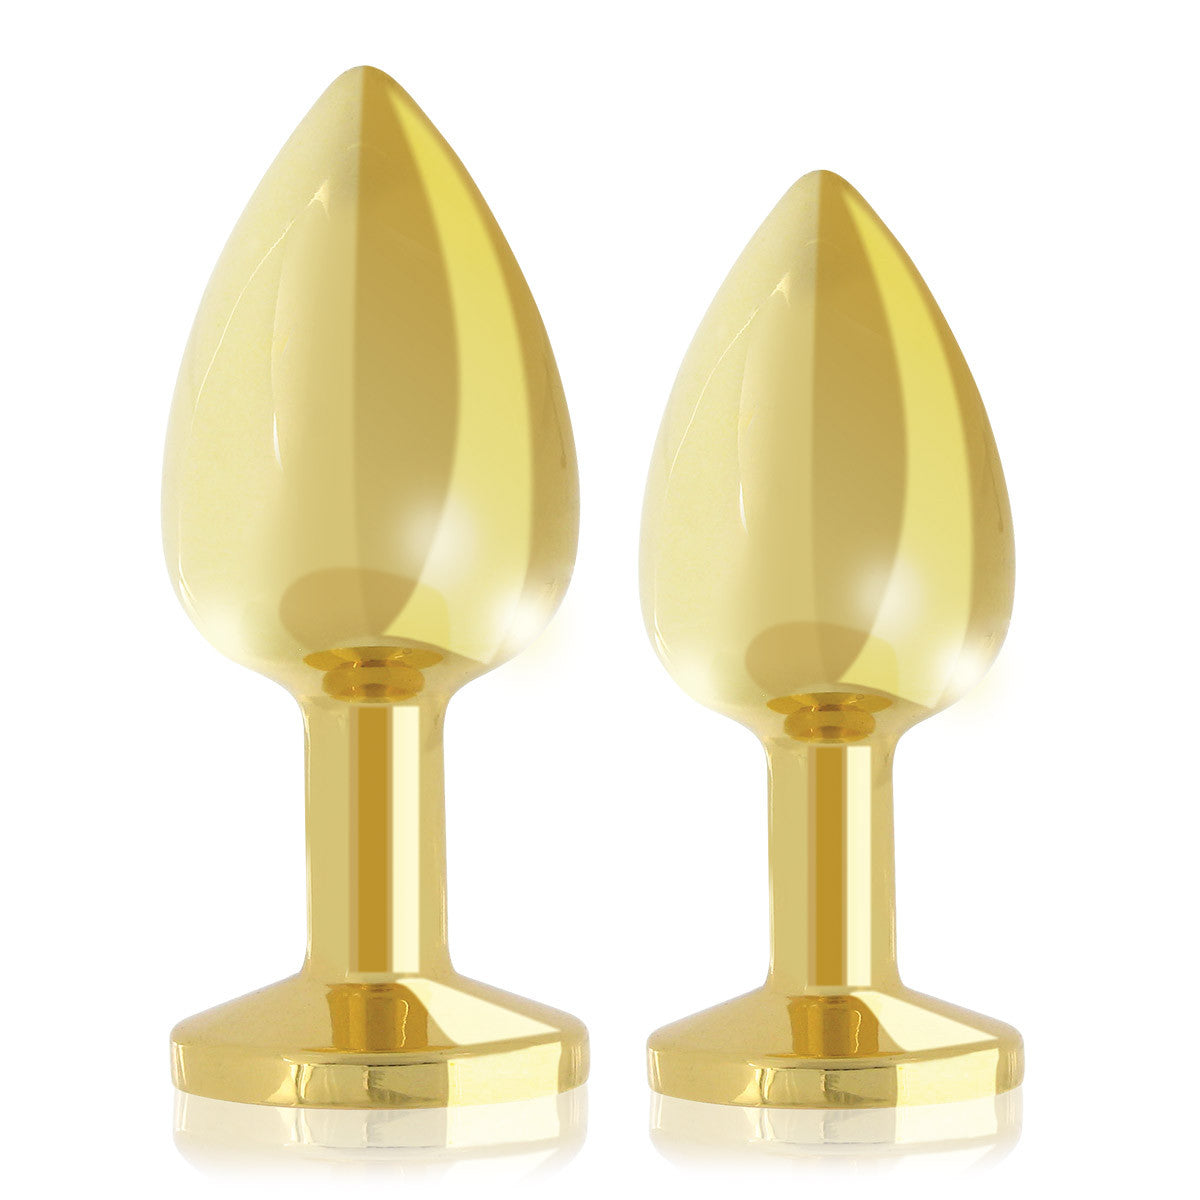 Rianne S Gold Booty Plug Set - Stainless steel with gem (pair)